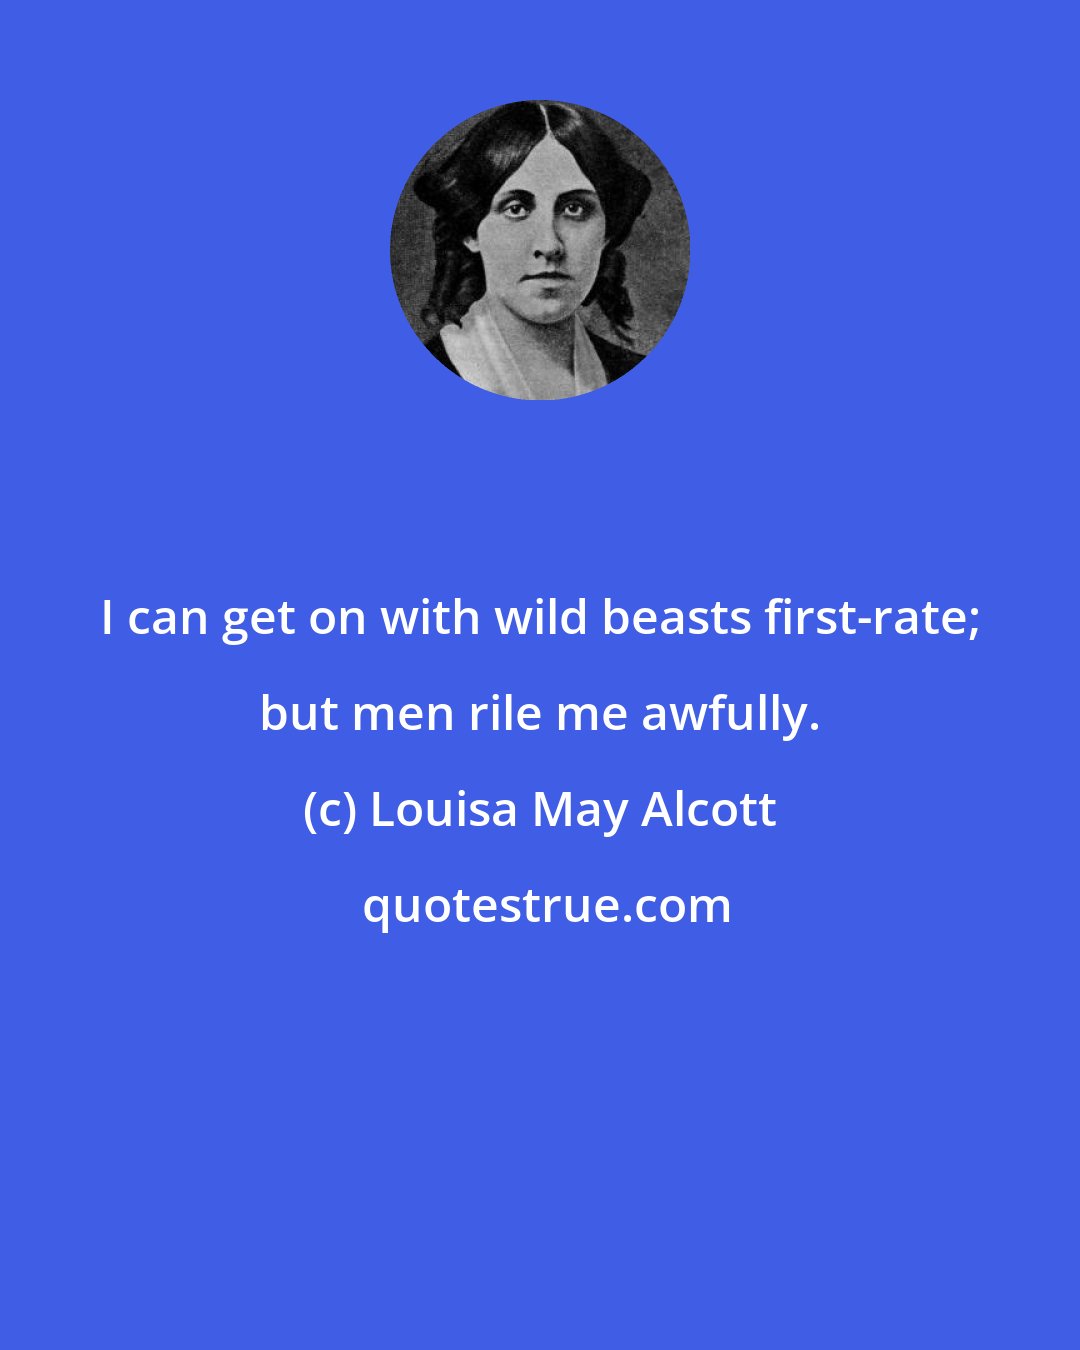 Louisa May Alcott: I can get on with wild beasts first-rate; but men rile me awfully.